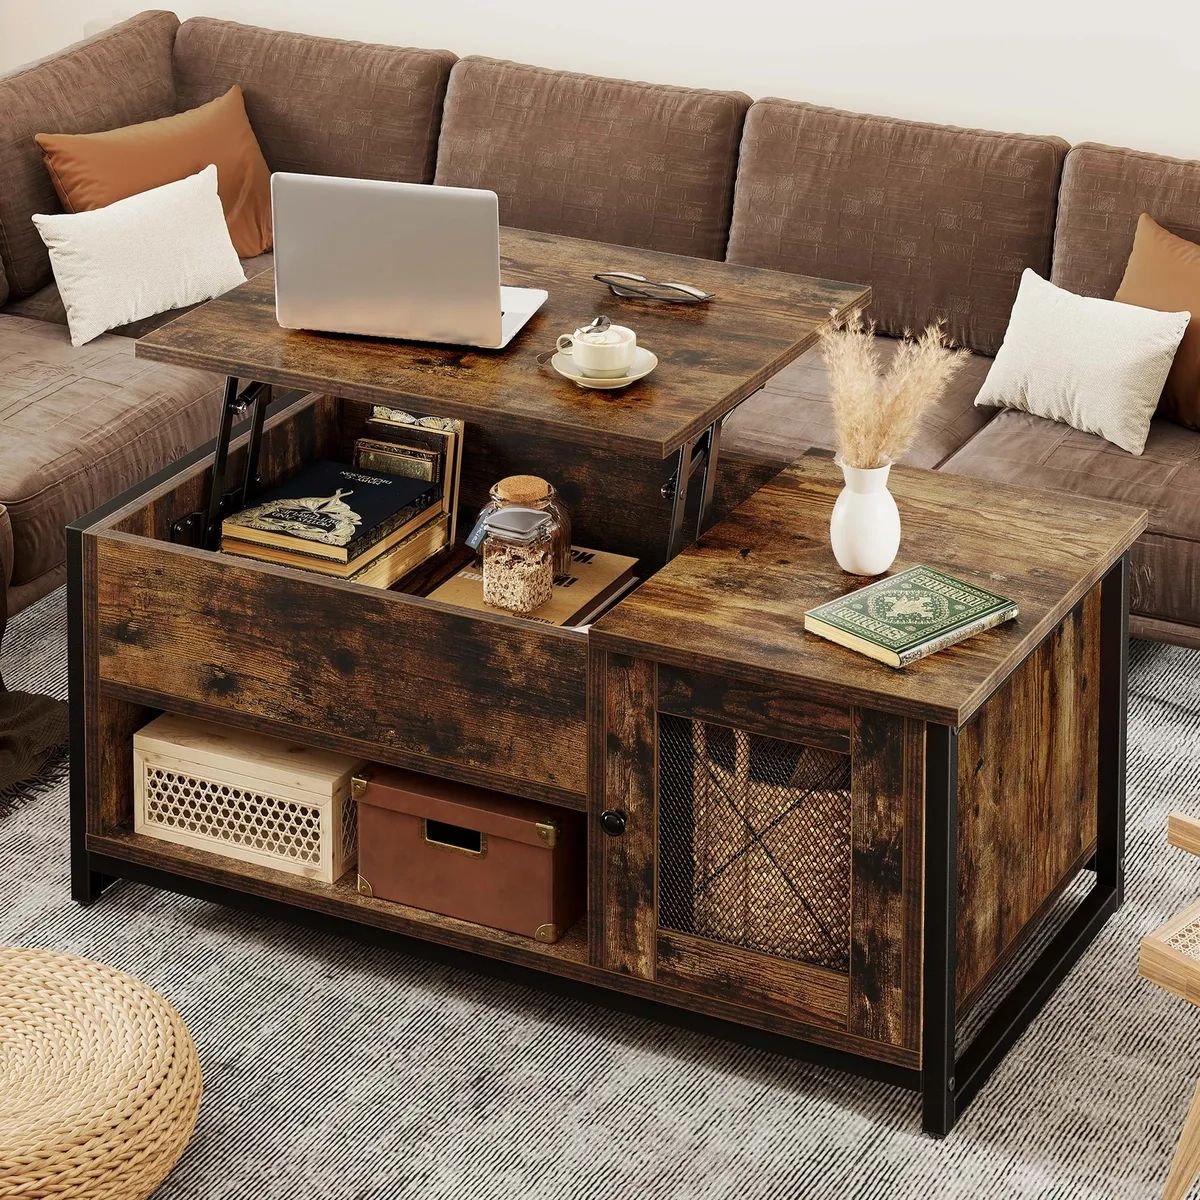 Farmhouse Lift Top Coffee Table With Hidden Compartment And Storage Shelf  Brown | Ebay Throughout Lift Top Coffee Tables With Hidden Storage Compartments (View 3 of 15)